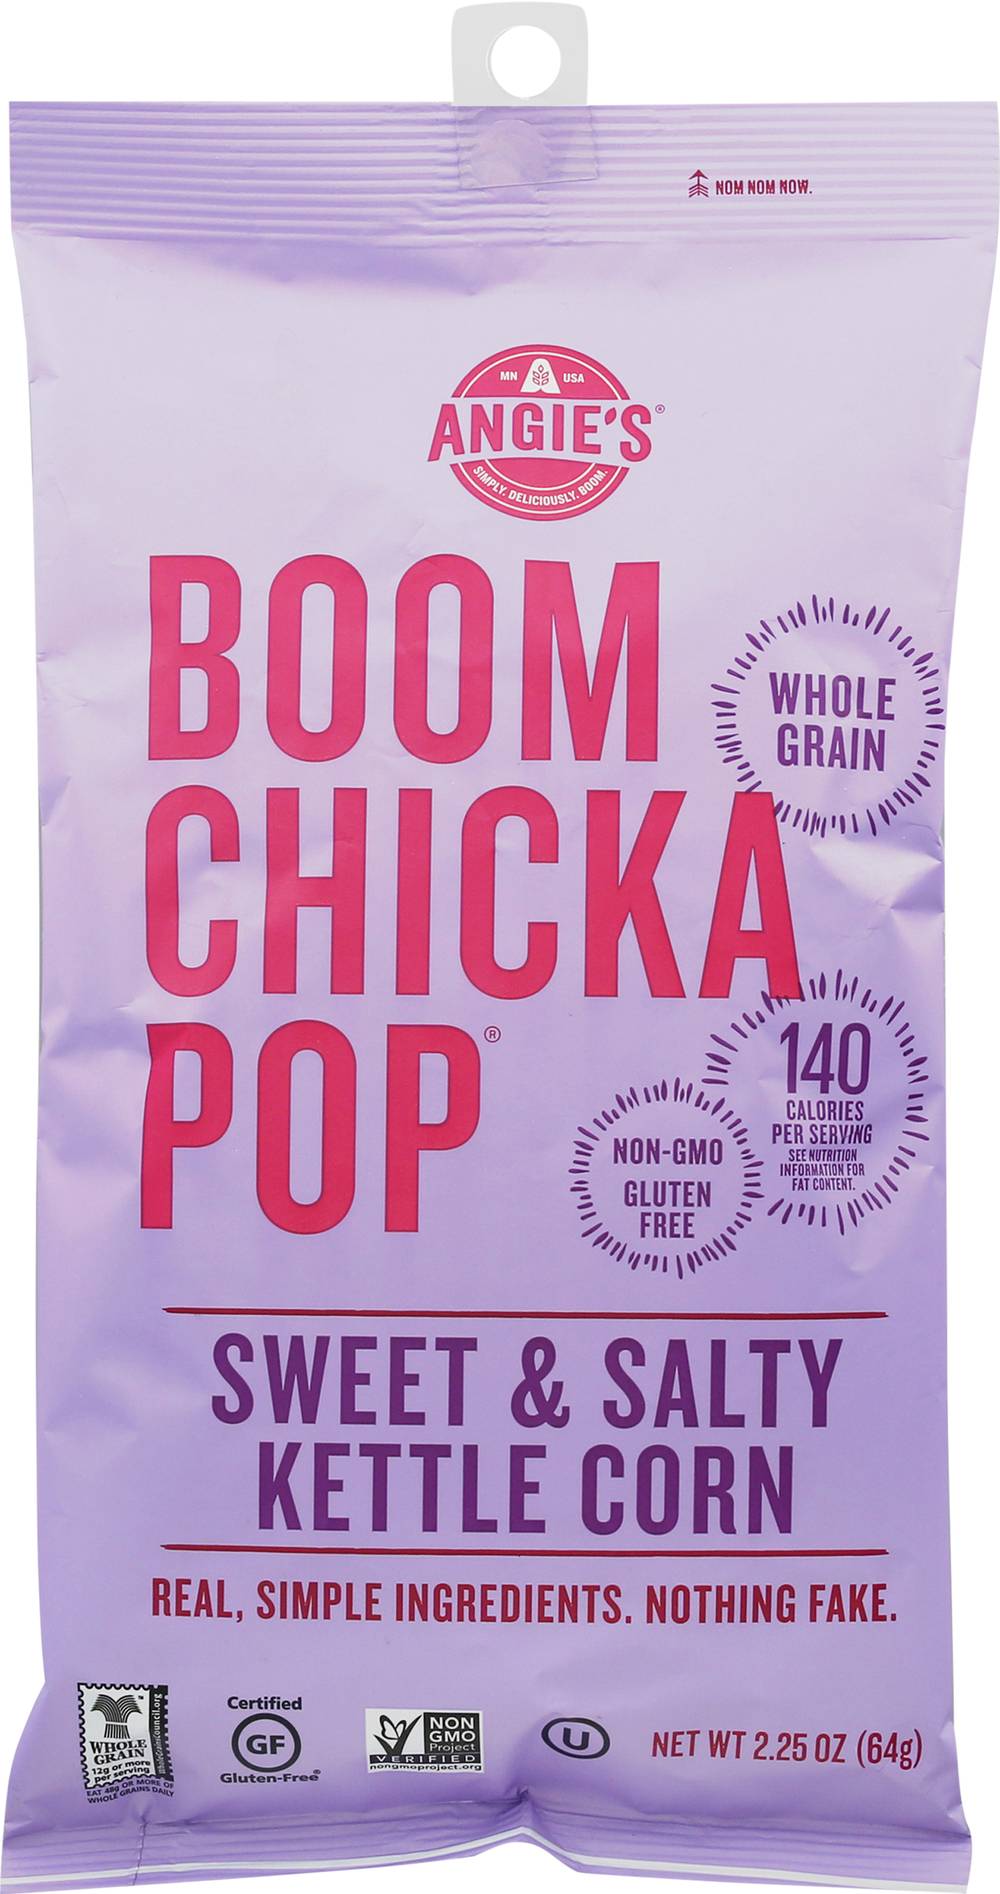 Angie's Boom Chicka Pop Kettle Corn (sweet & salty)